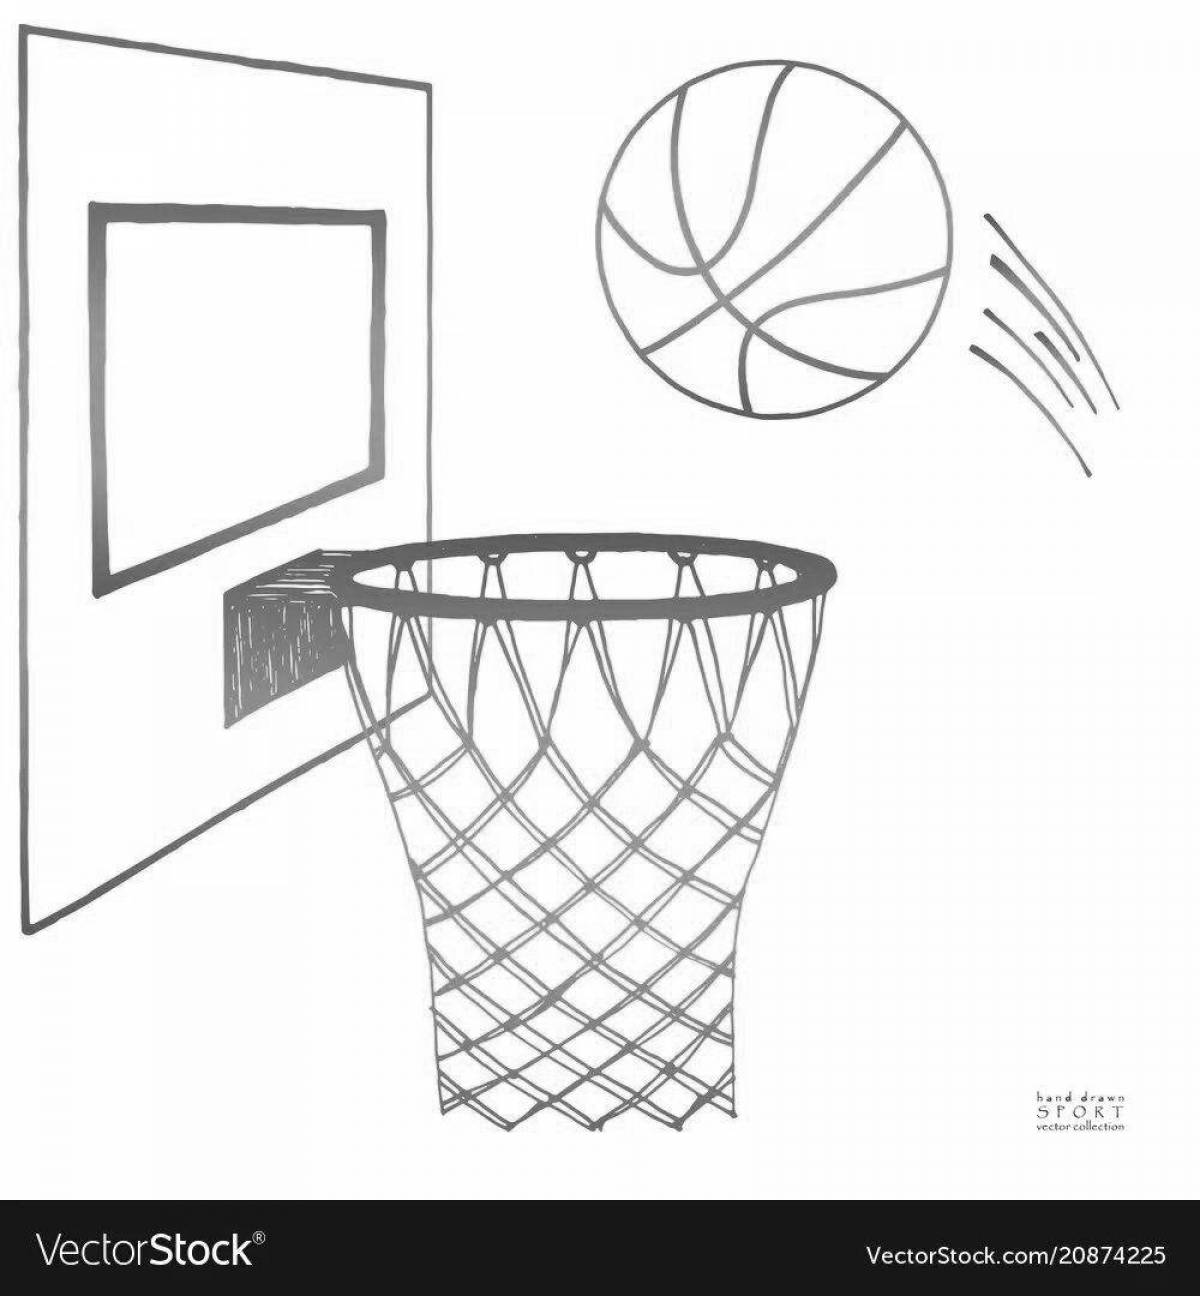 Exquisite basketball hoop coloring page